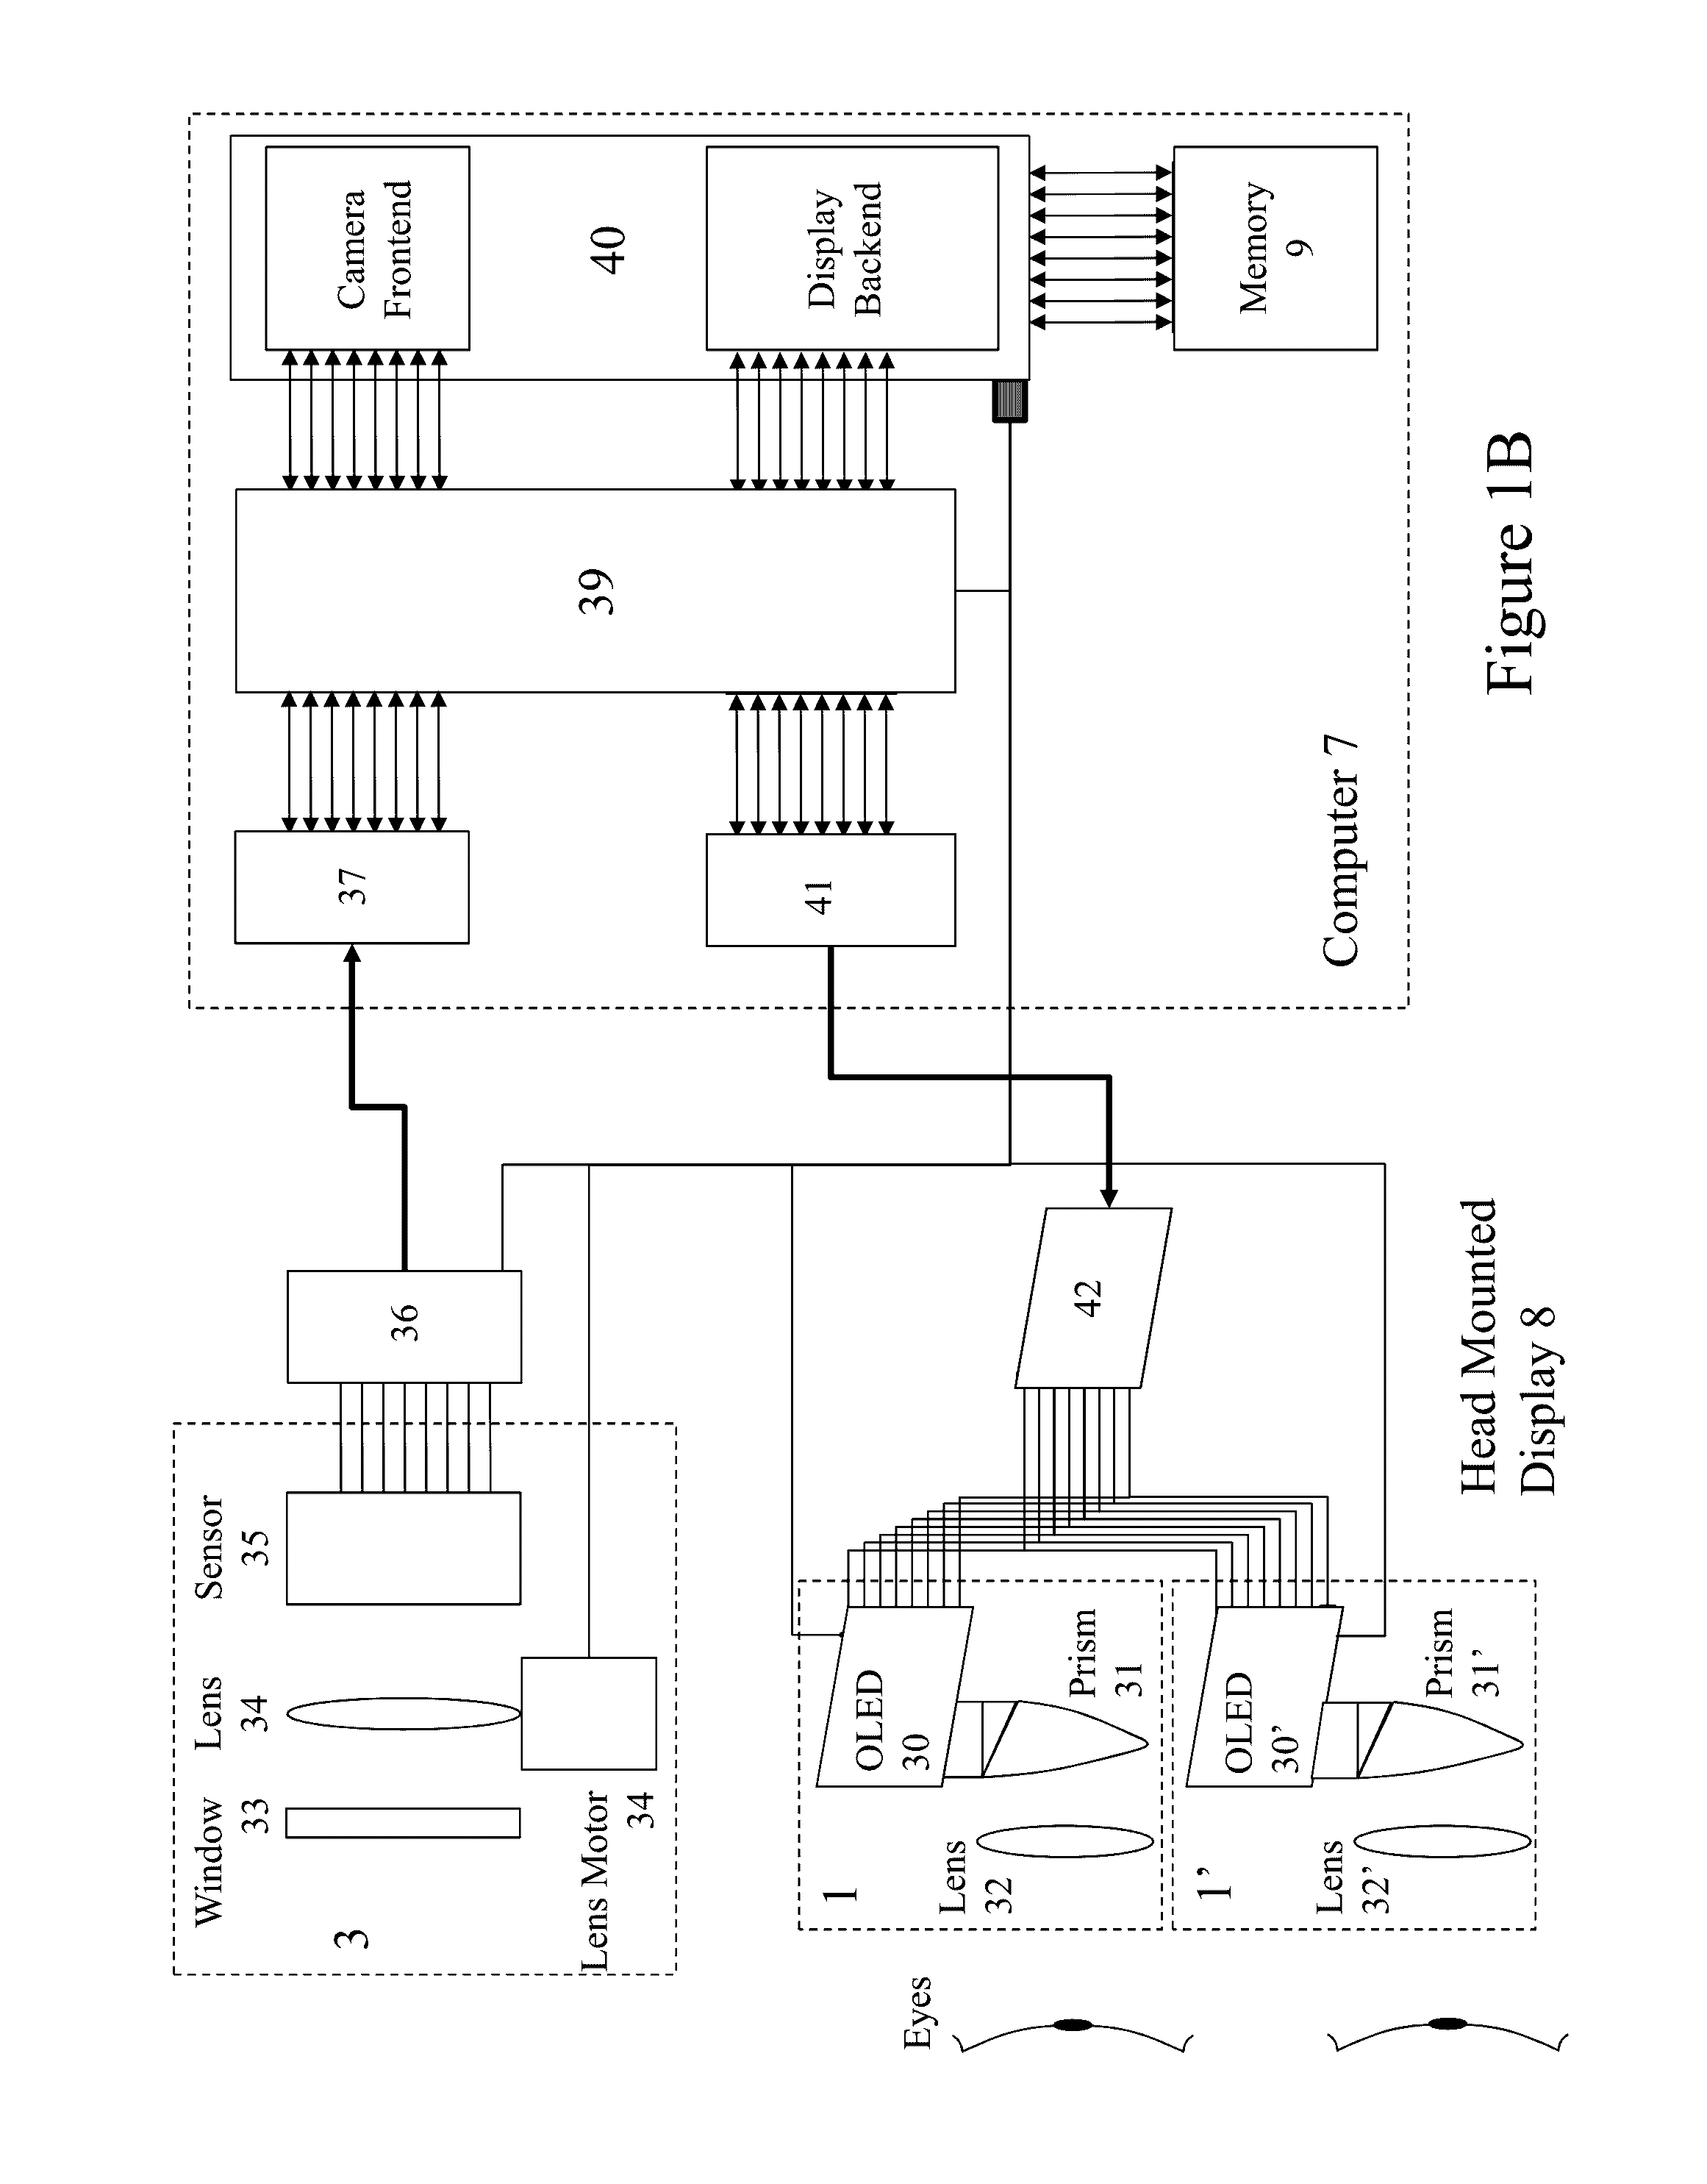 Method and apparatus for a dynamic "region of interest" in a display system